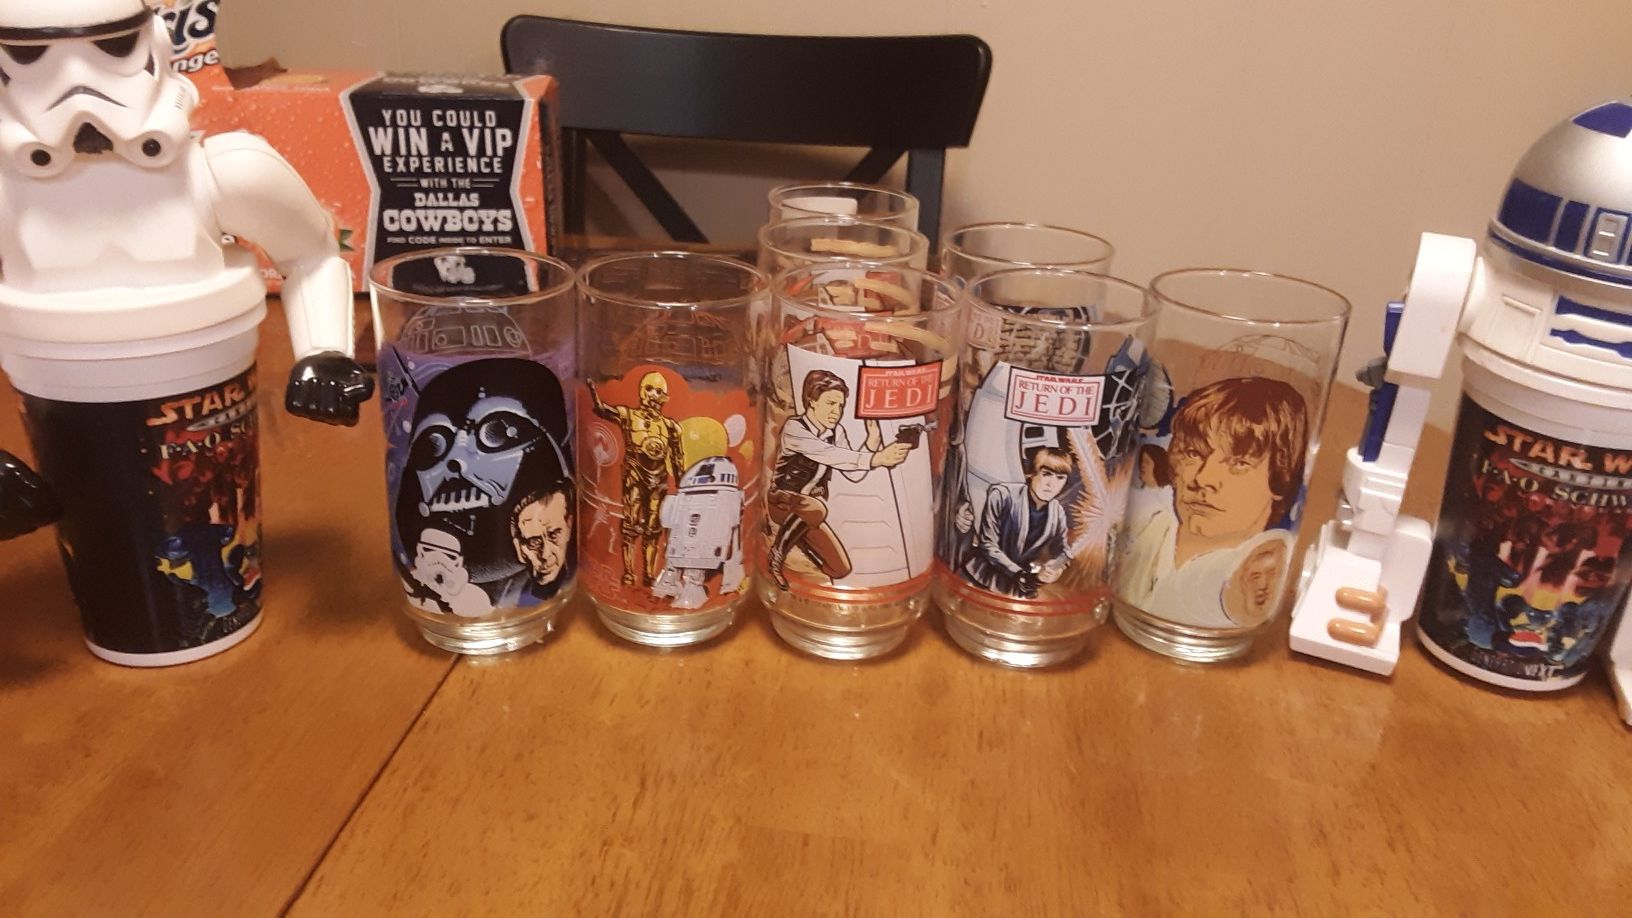 Burger king collectable STAR WARS coca cola glasses and 2 cup attachments